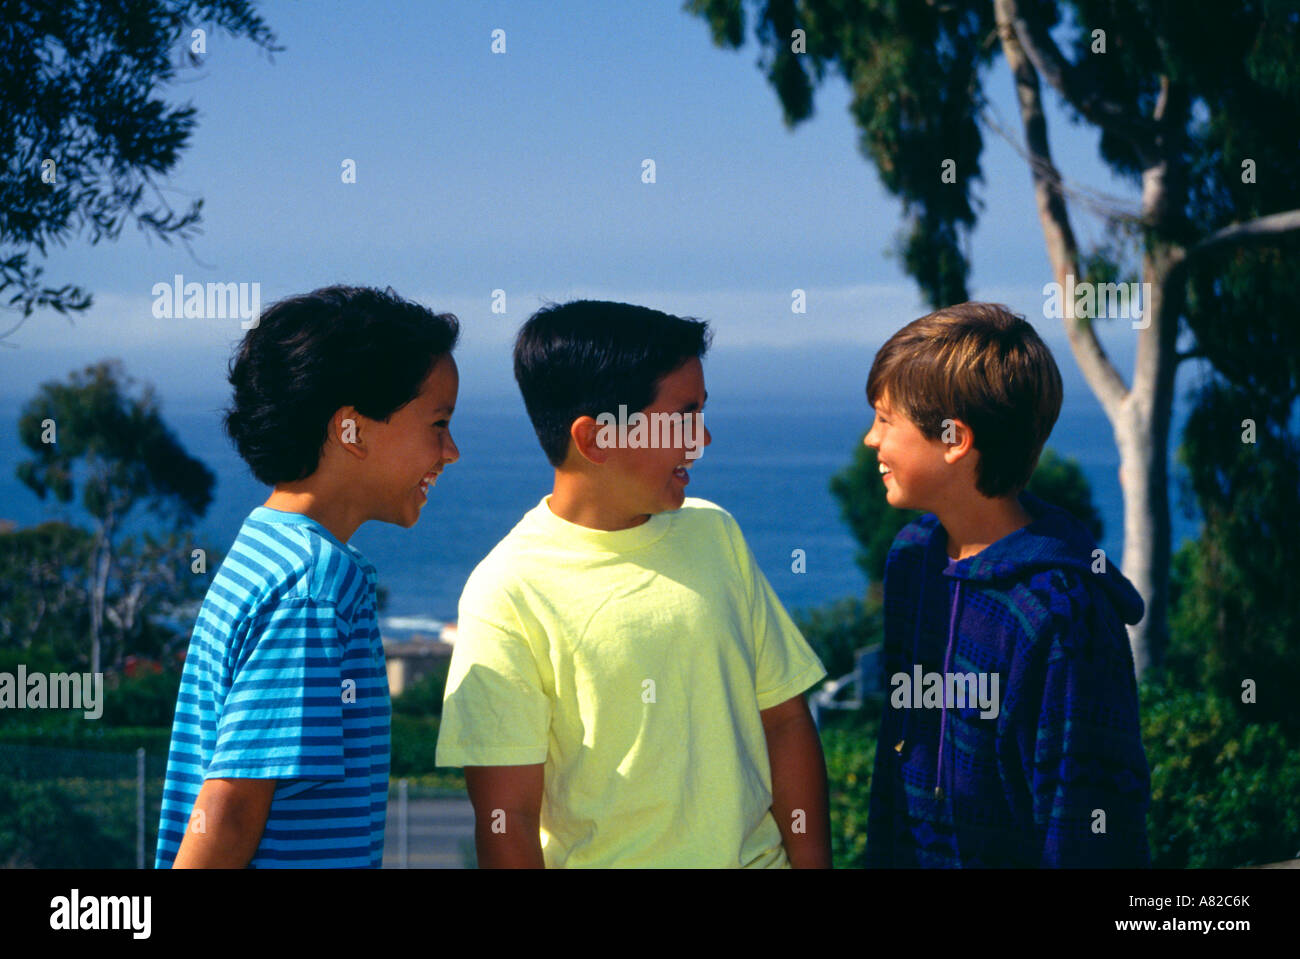 young person people Three young boys 11-13 year olds old hang hanging out park on hillside overlooking ocean US USA America Myrleen Pearson Stock Photo